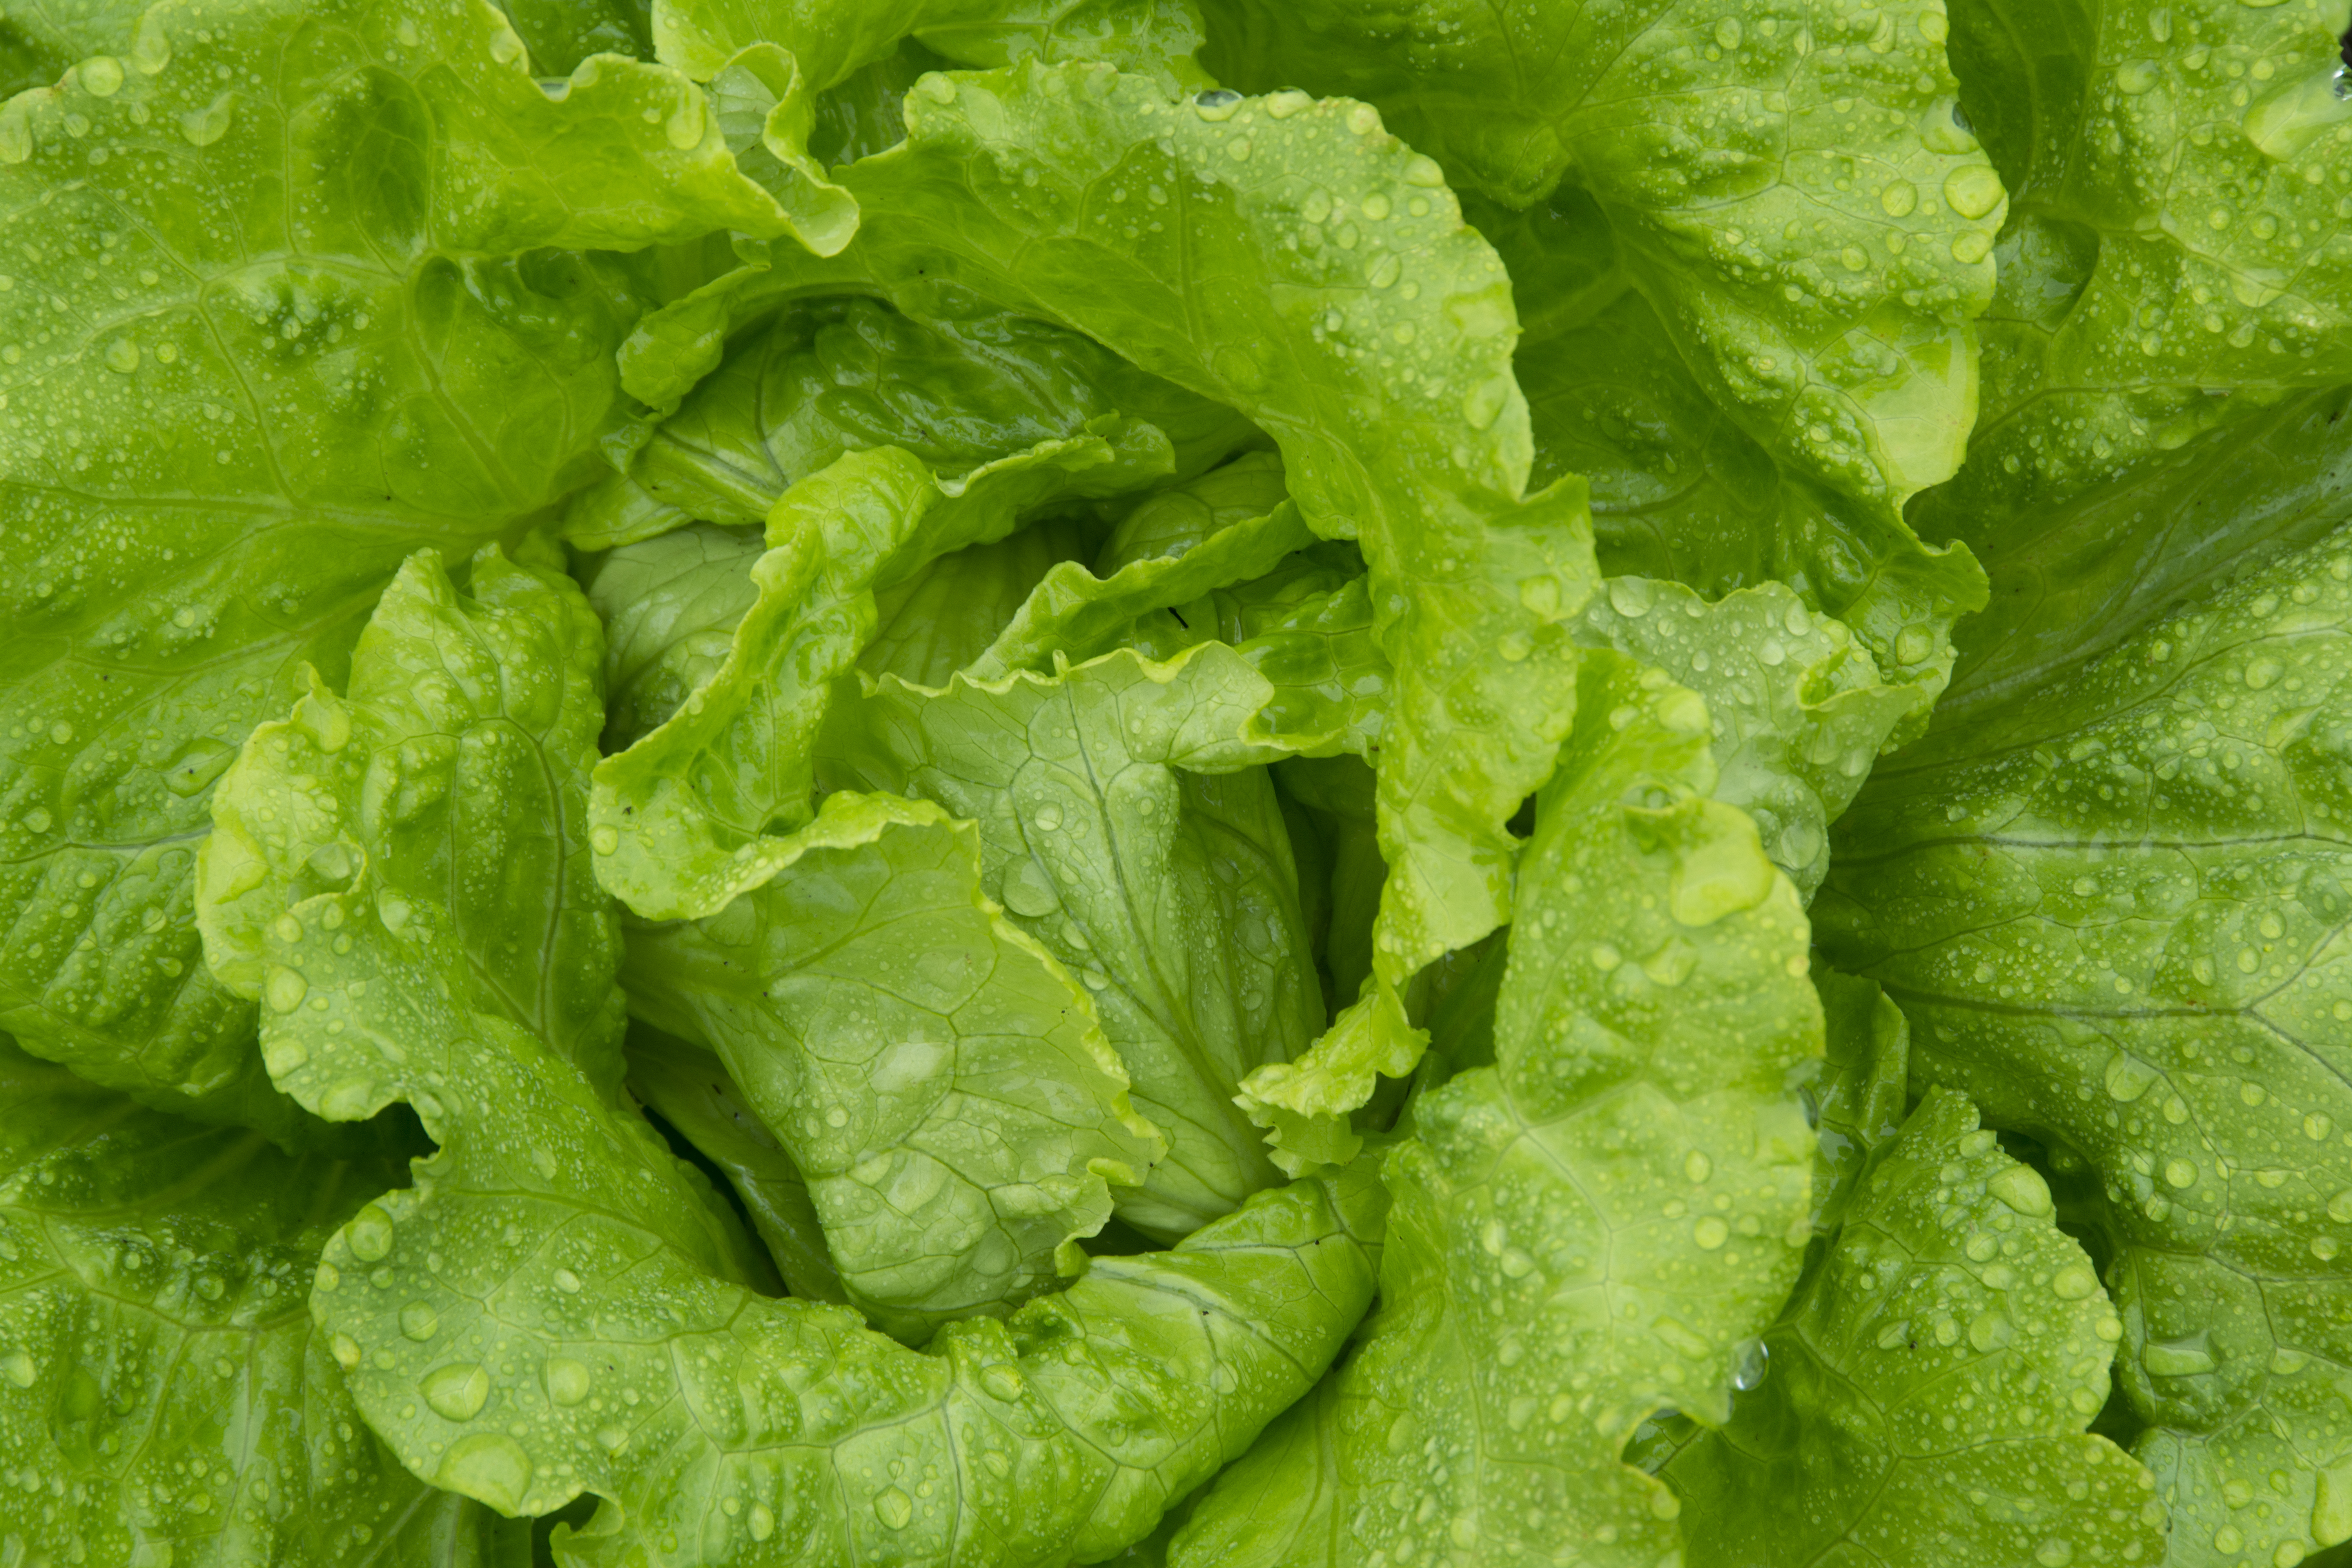 While lettuce is known for growing fast in full sun, Joan Casanova, spokesperson for Bonnie Plants, says it is one of few vegetables that also does well in the shade.